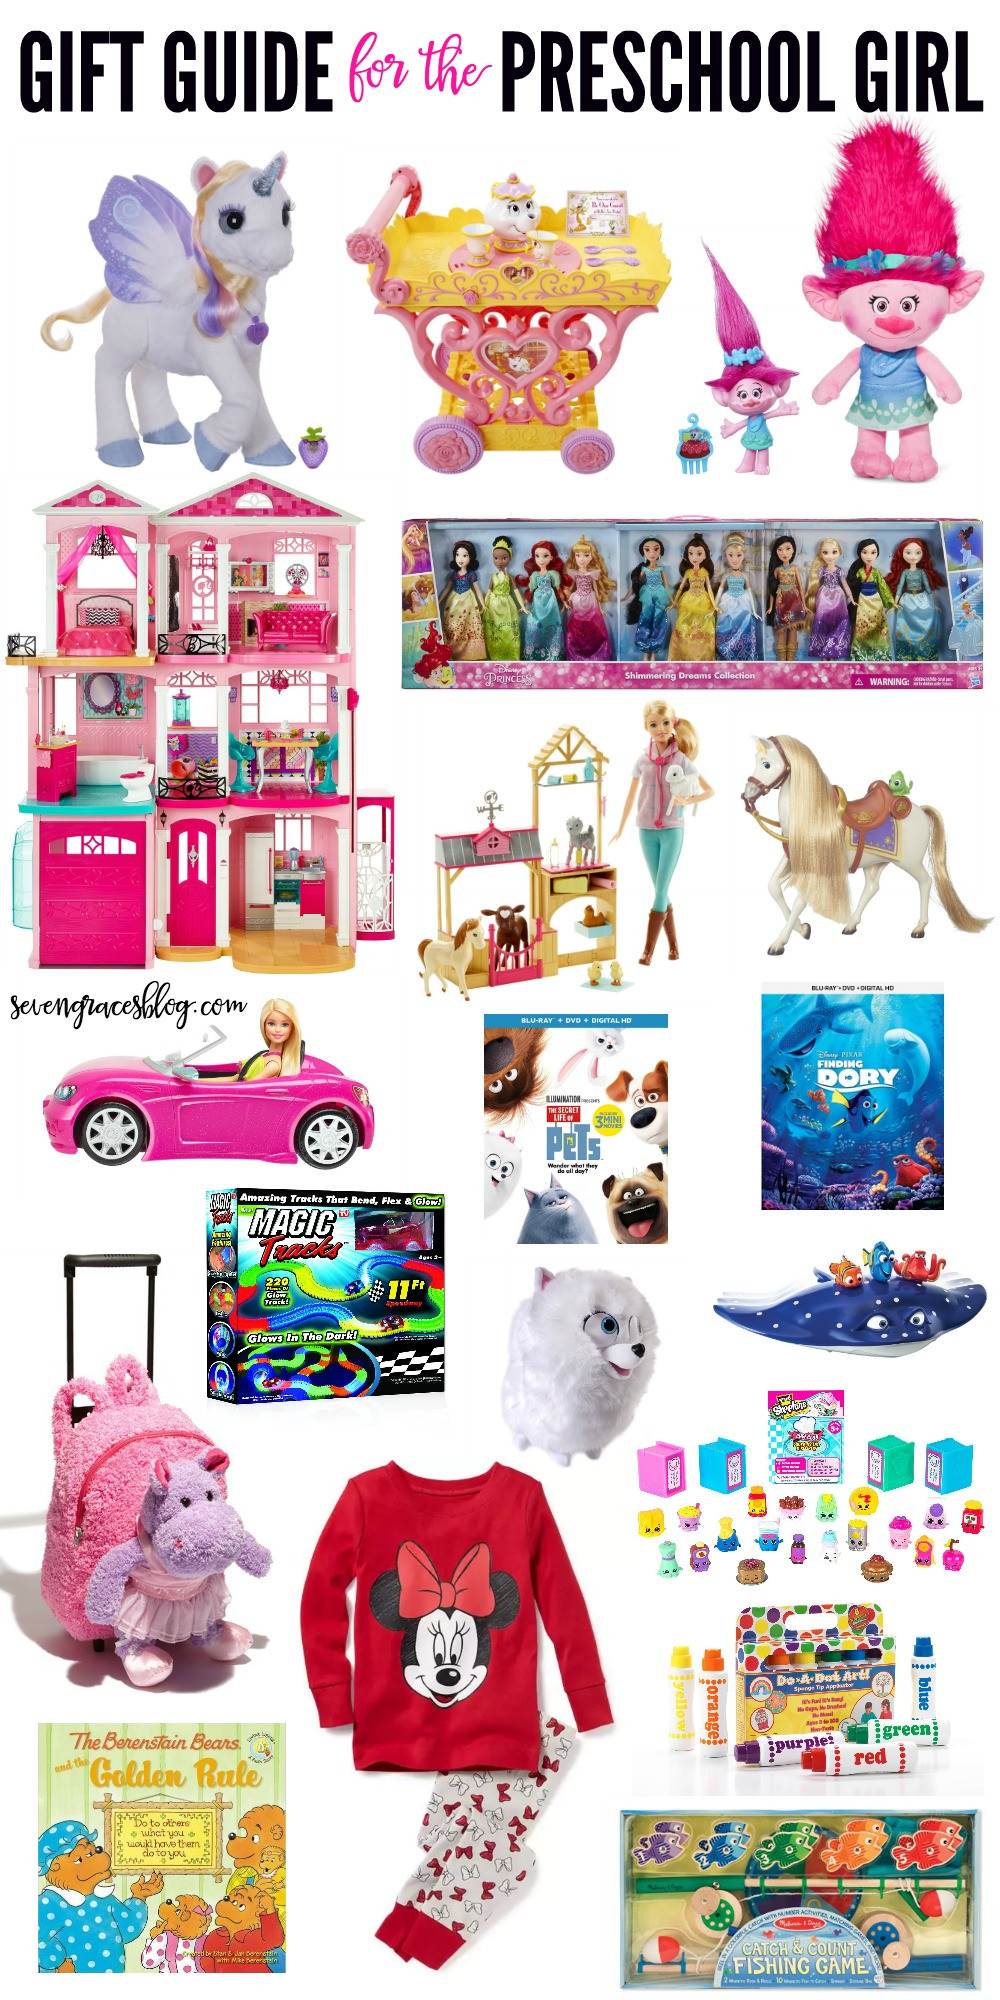 Toddler Girls Gift Ideas
 Gift Ideas for the Preschool Girl and for Baby s First